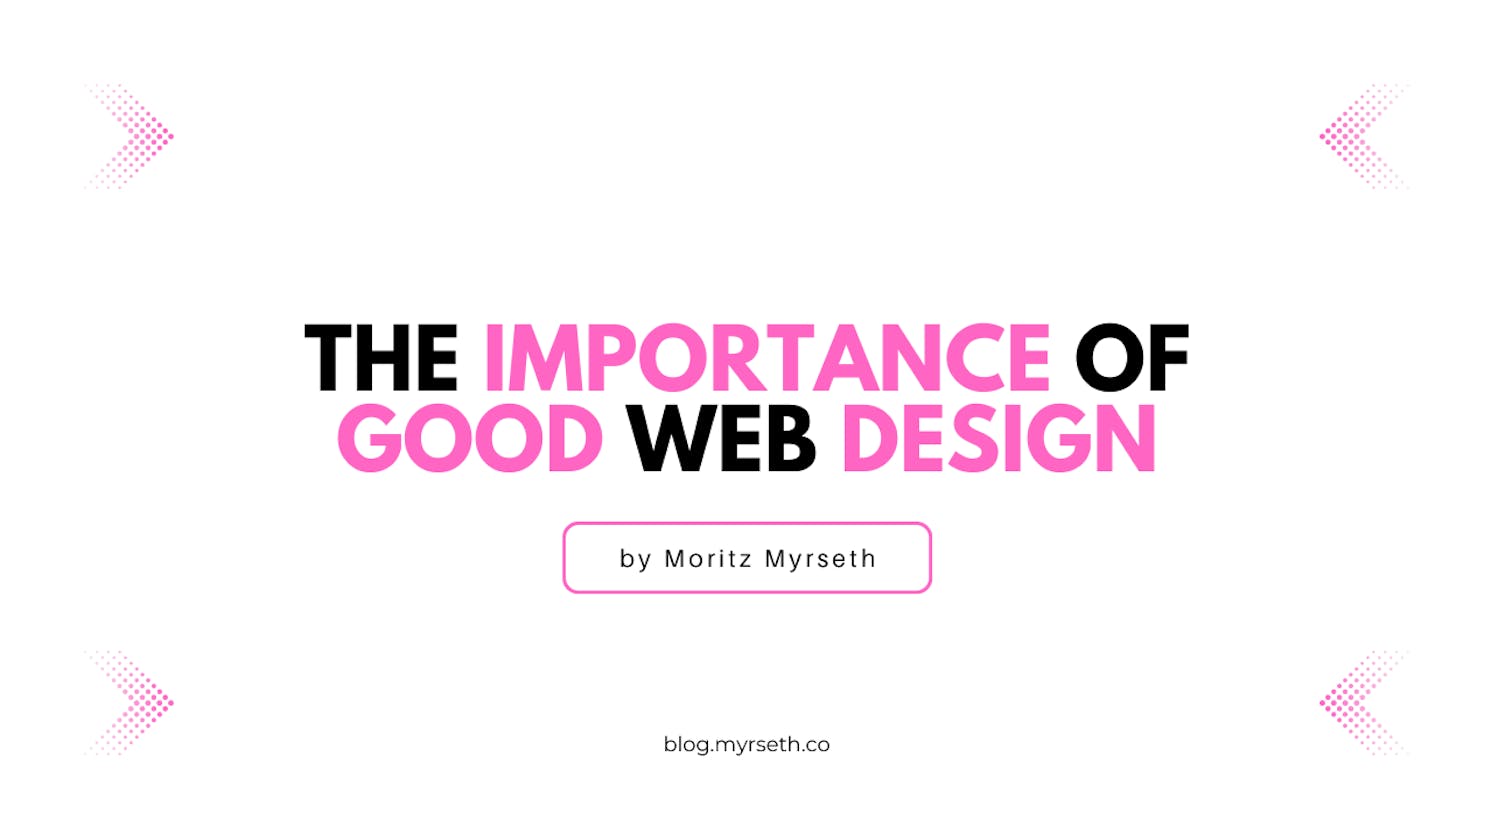 The Importance of Good Web Design